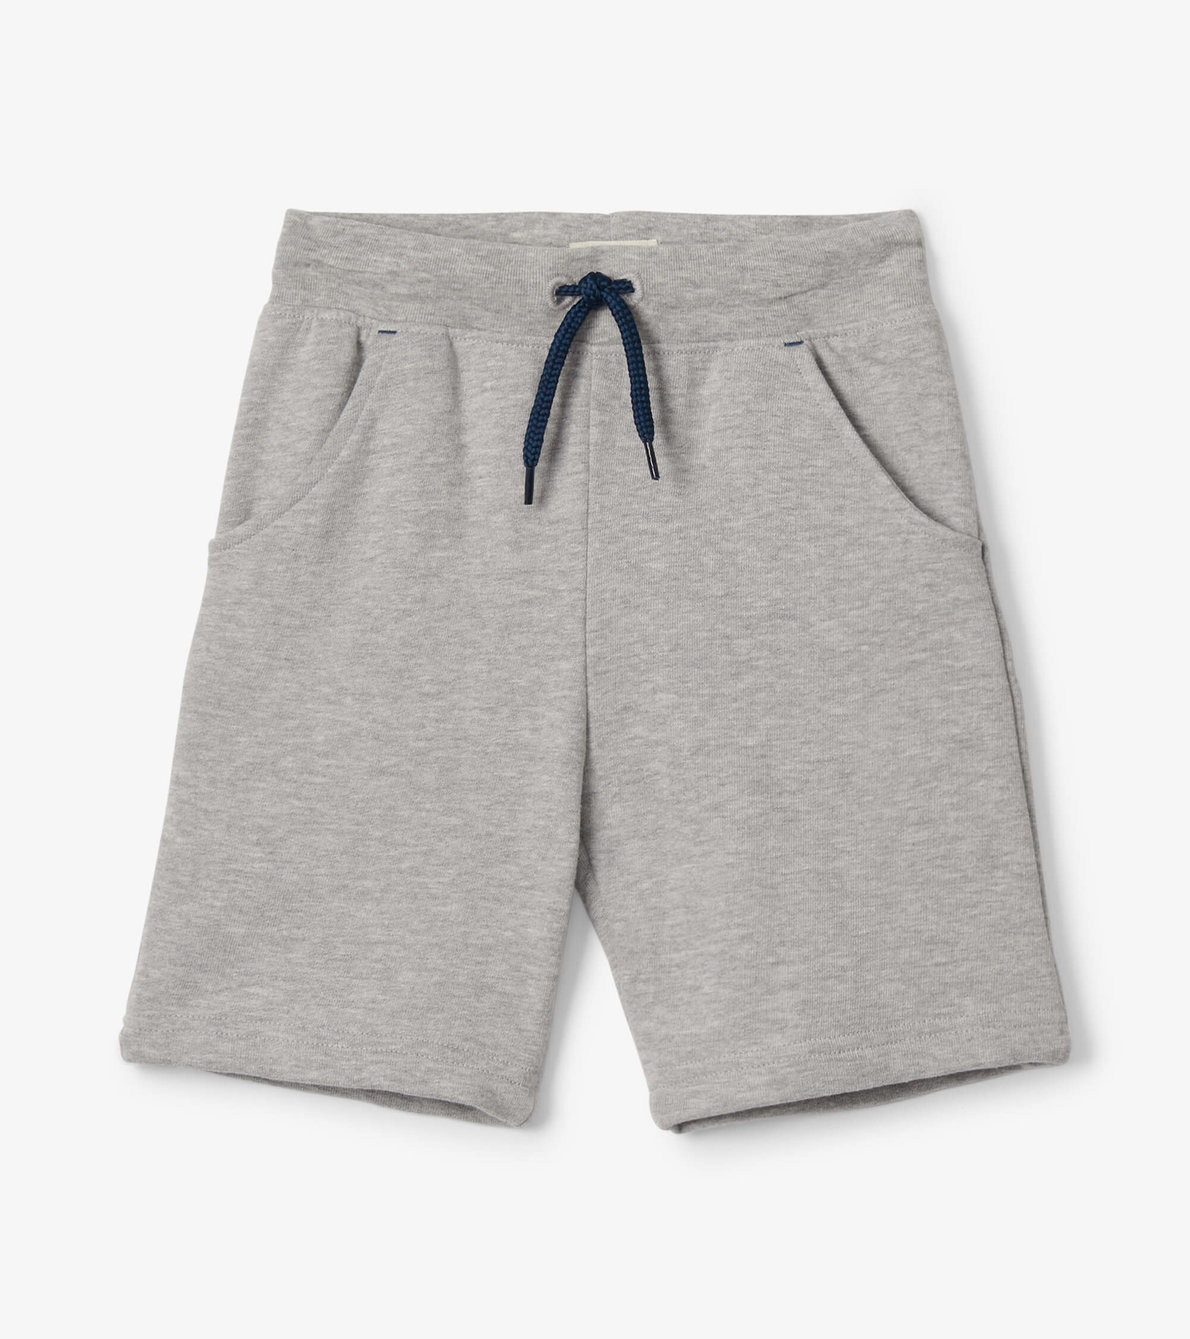 View larger image of Athletic Grey Terry Shorts